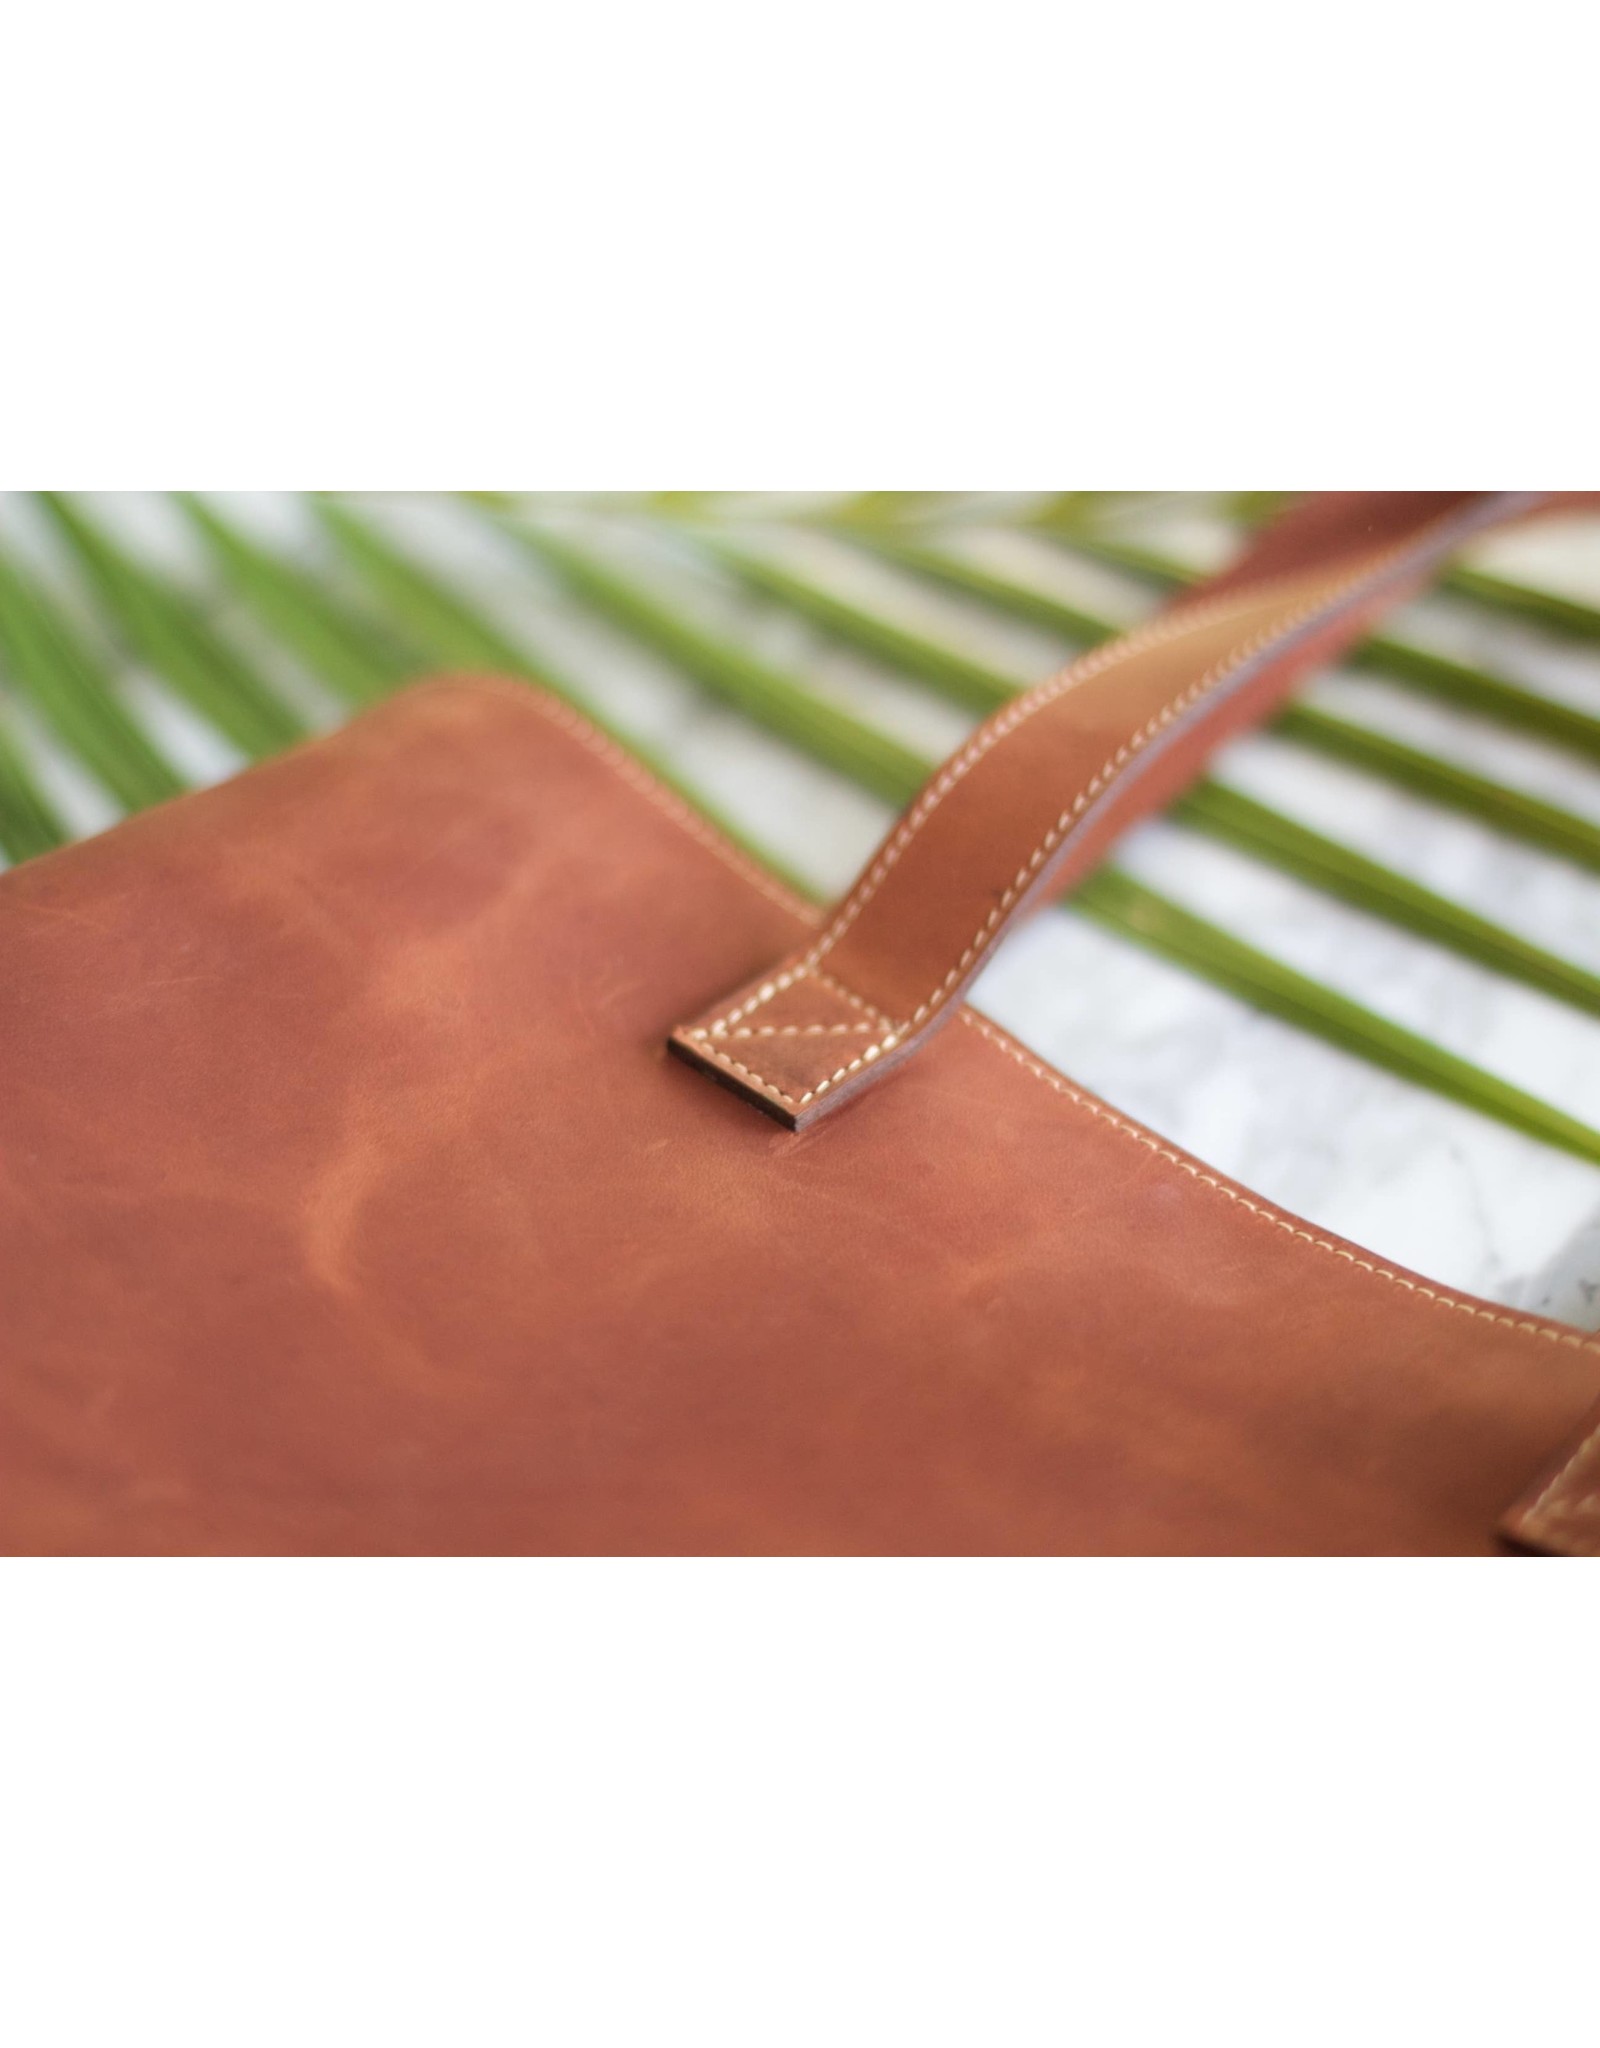 Trade roots Brown Leather Tote, Nicaragua